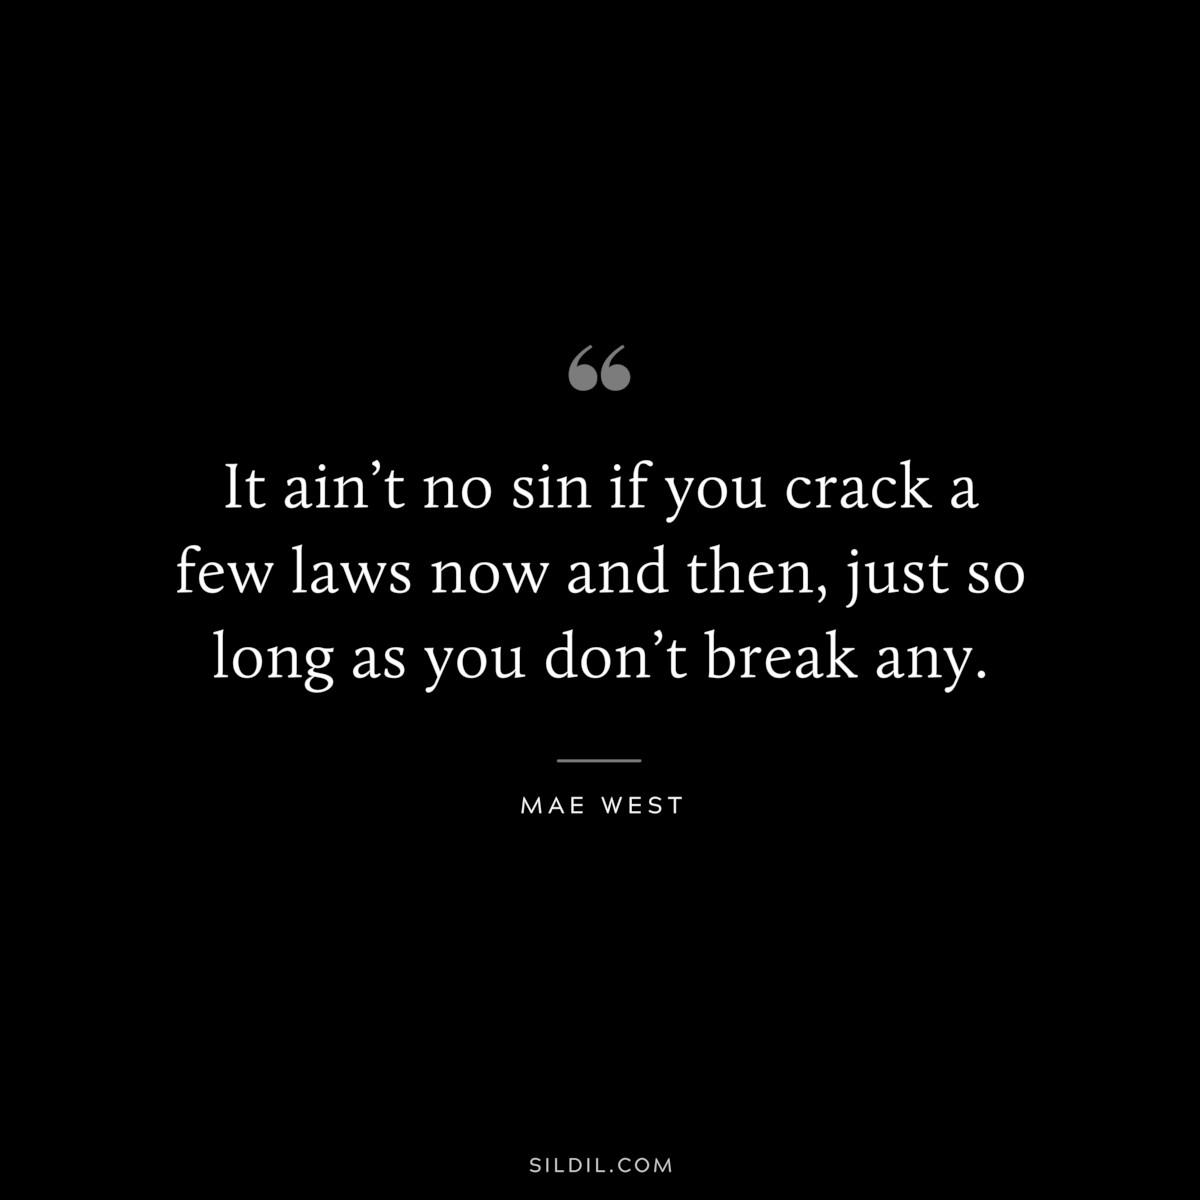 It ain’t no sin if you crack a few laws now and then, just so long as you don’t break any. ― Mae West